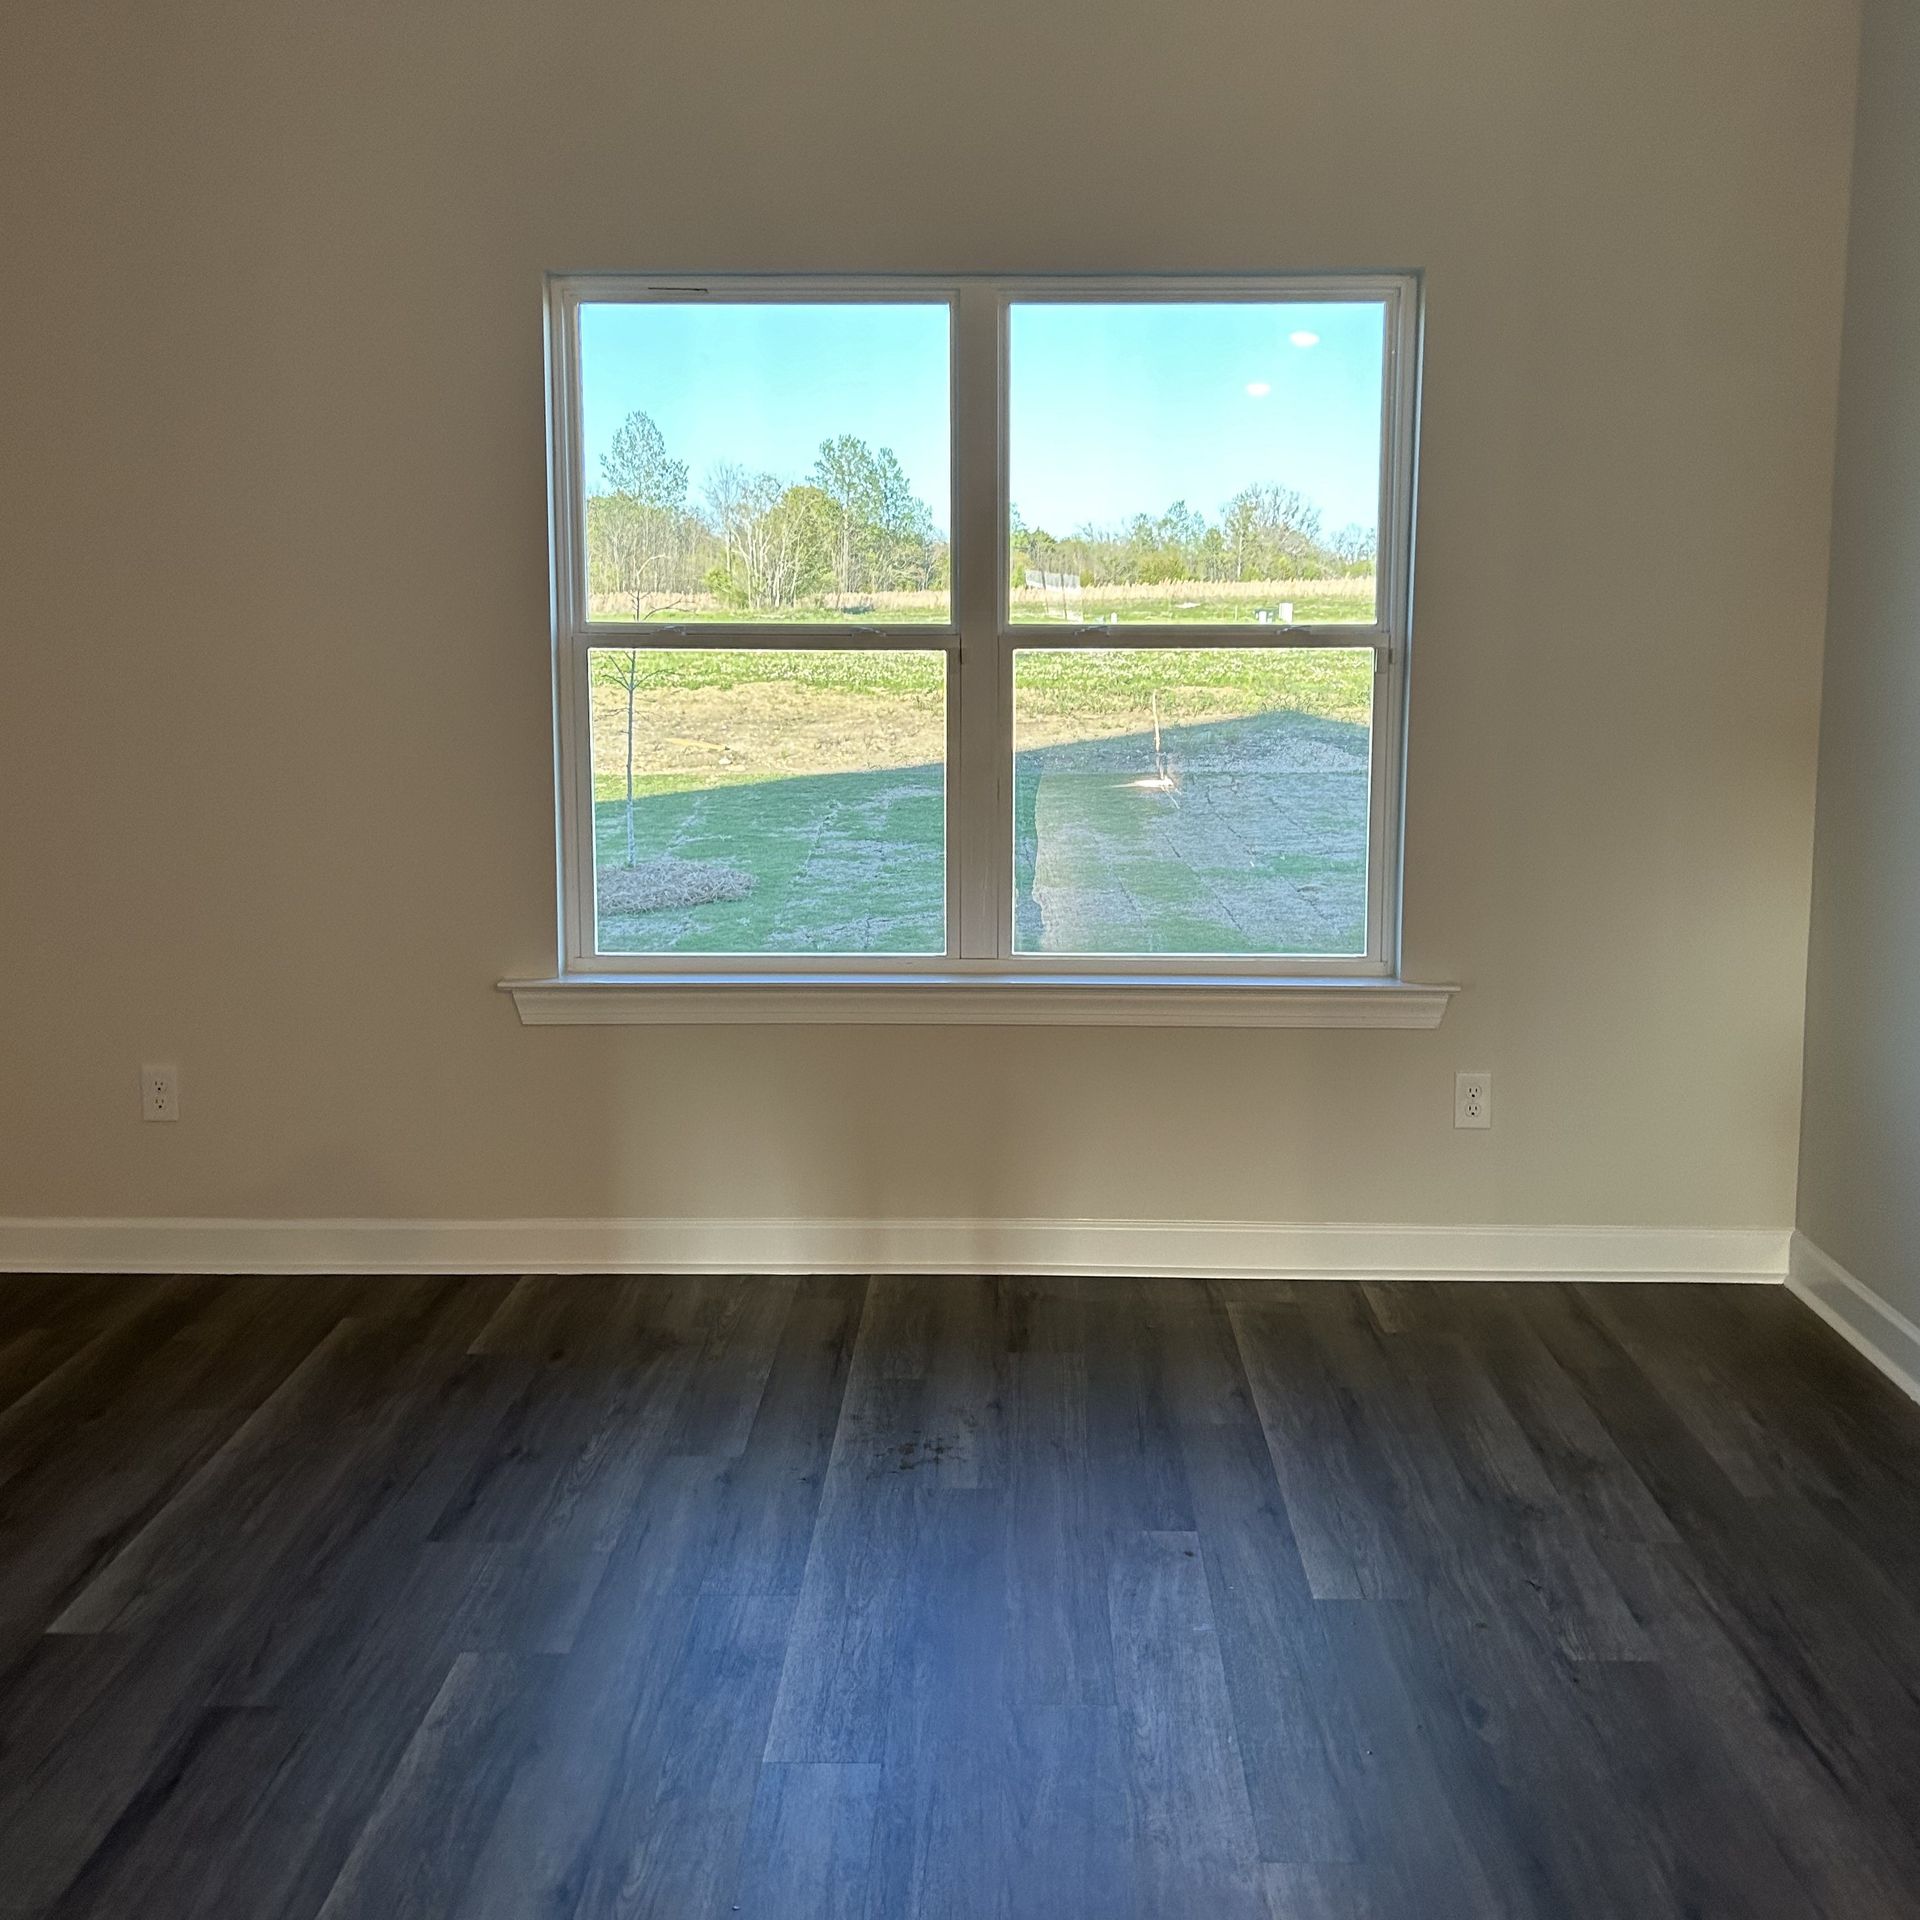 window blinds replaced by tint - SPF Performance residential tint addresses the most direct Sunlight along with bright UV Glare with heat gain. Montgomery, AL